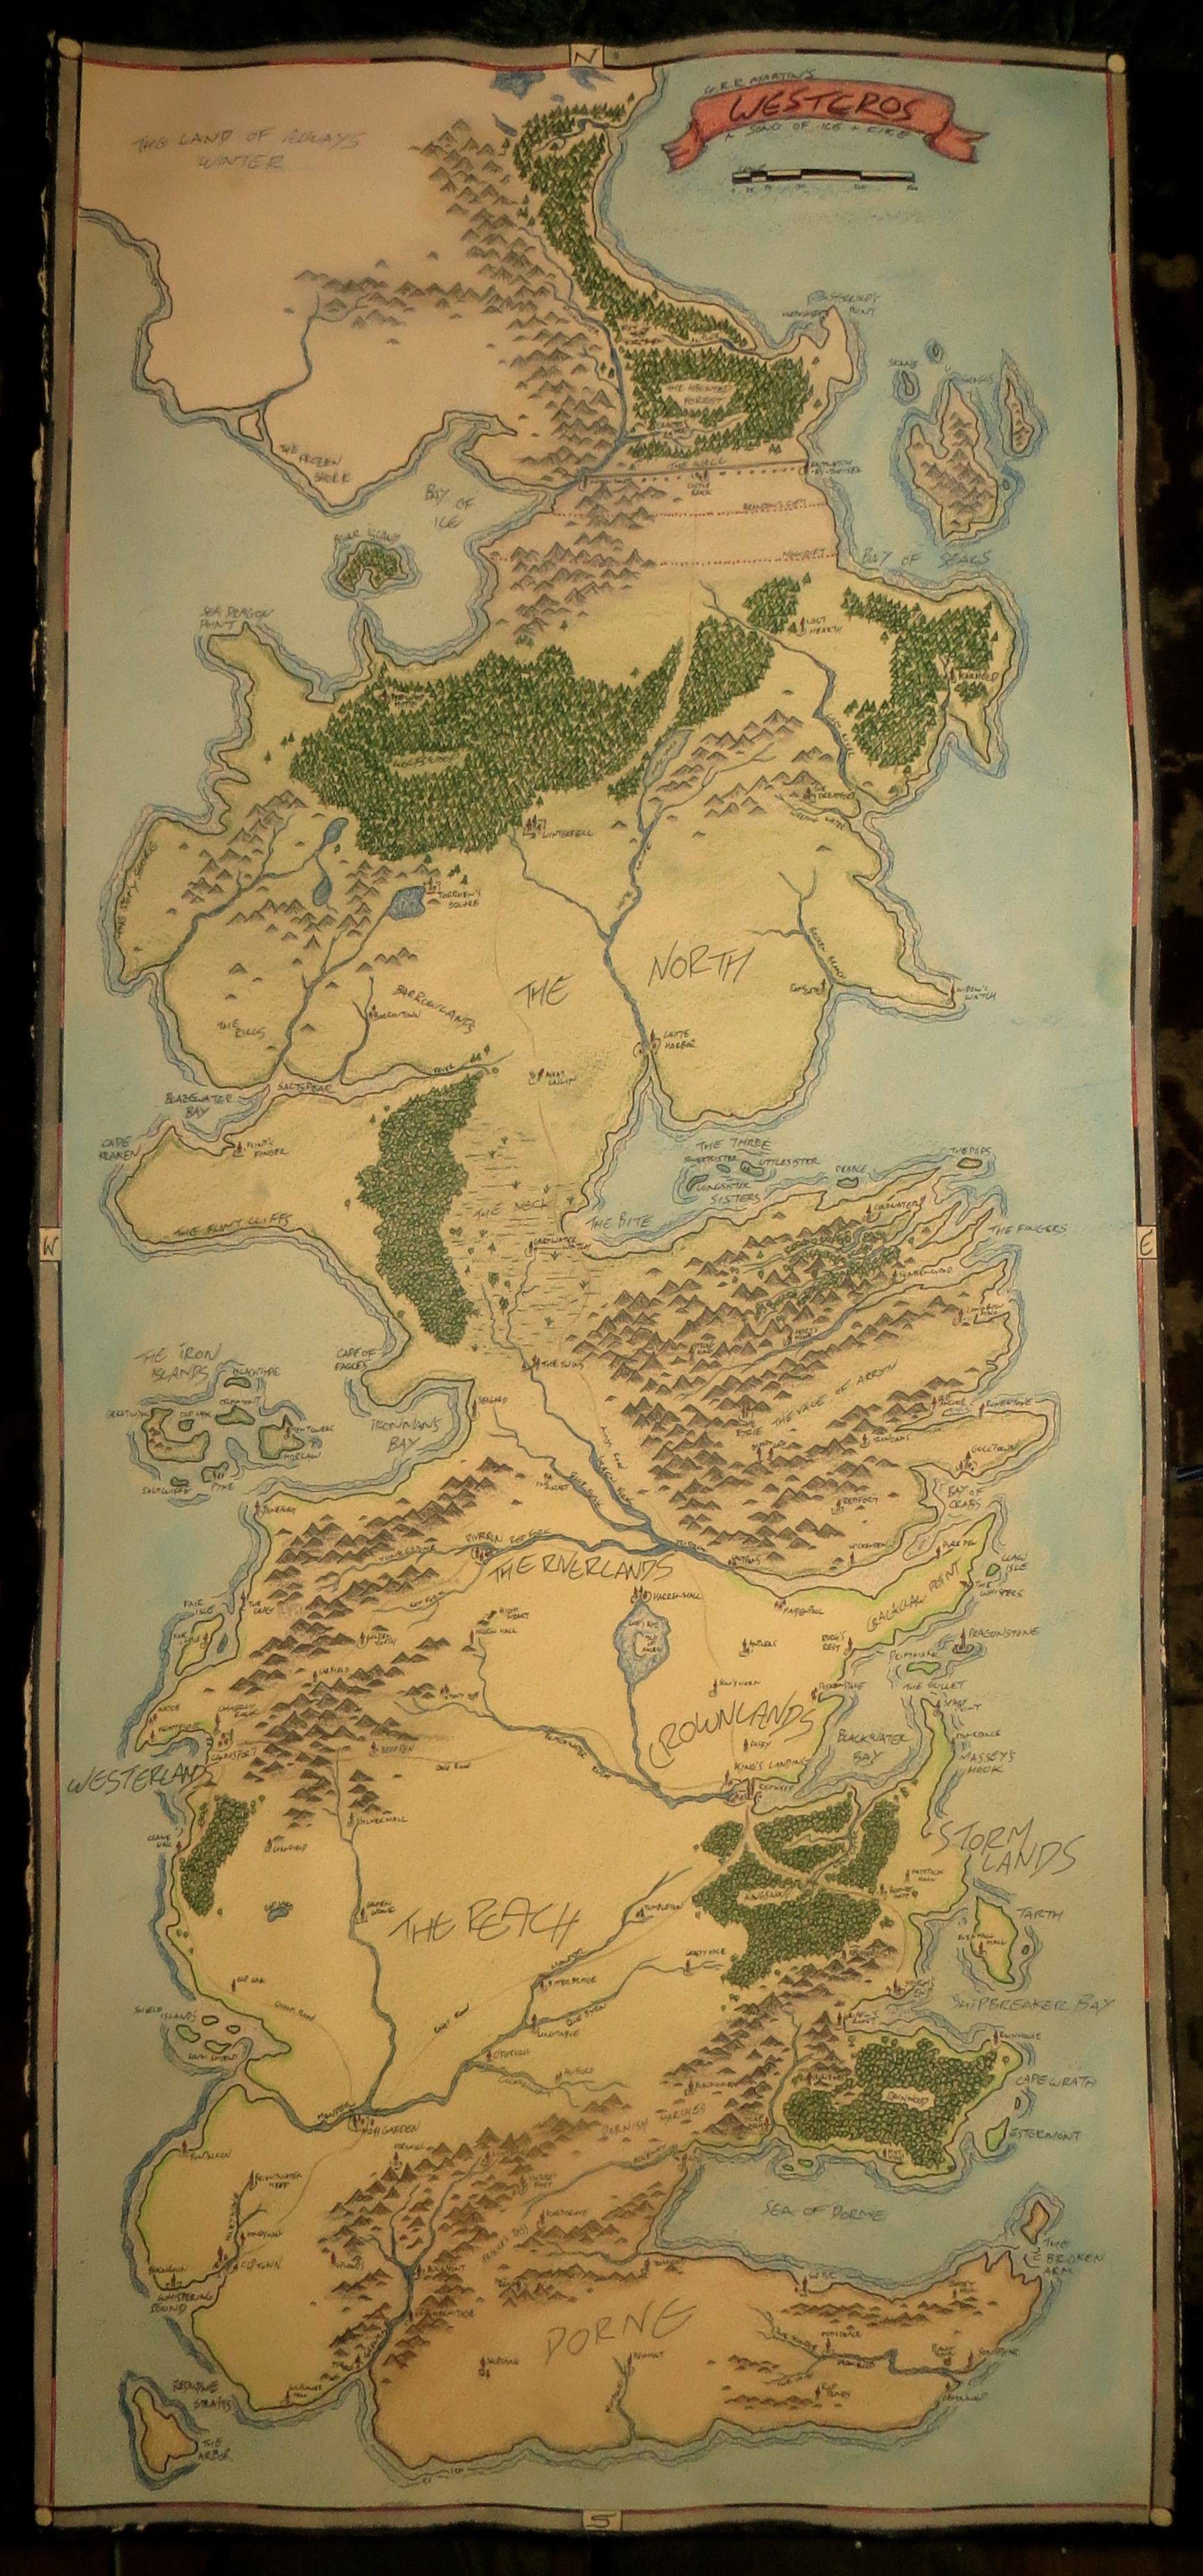 I Drew A Map Of Westeros From Game Of Thrones HD Wallpaper